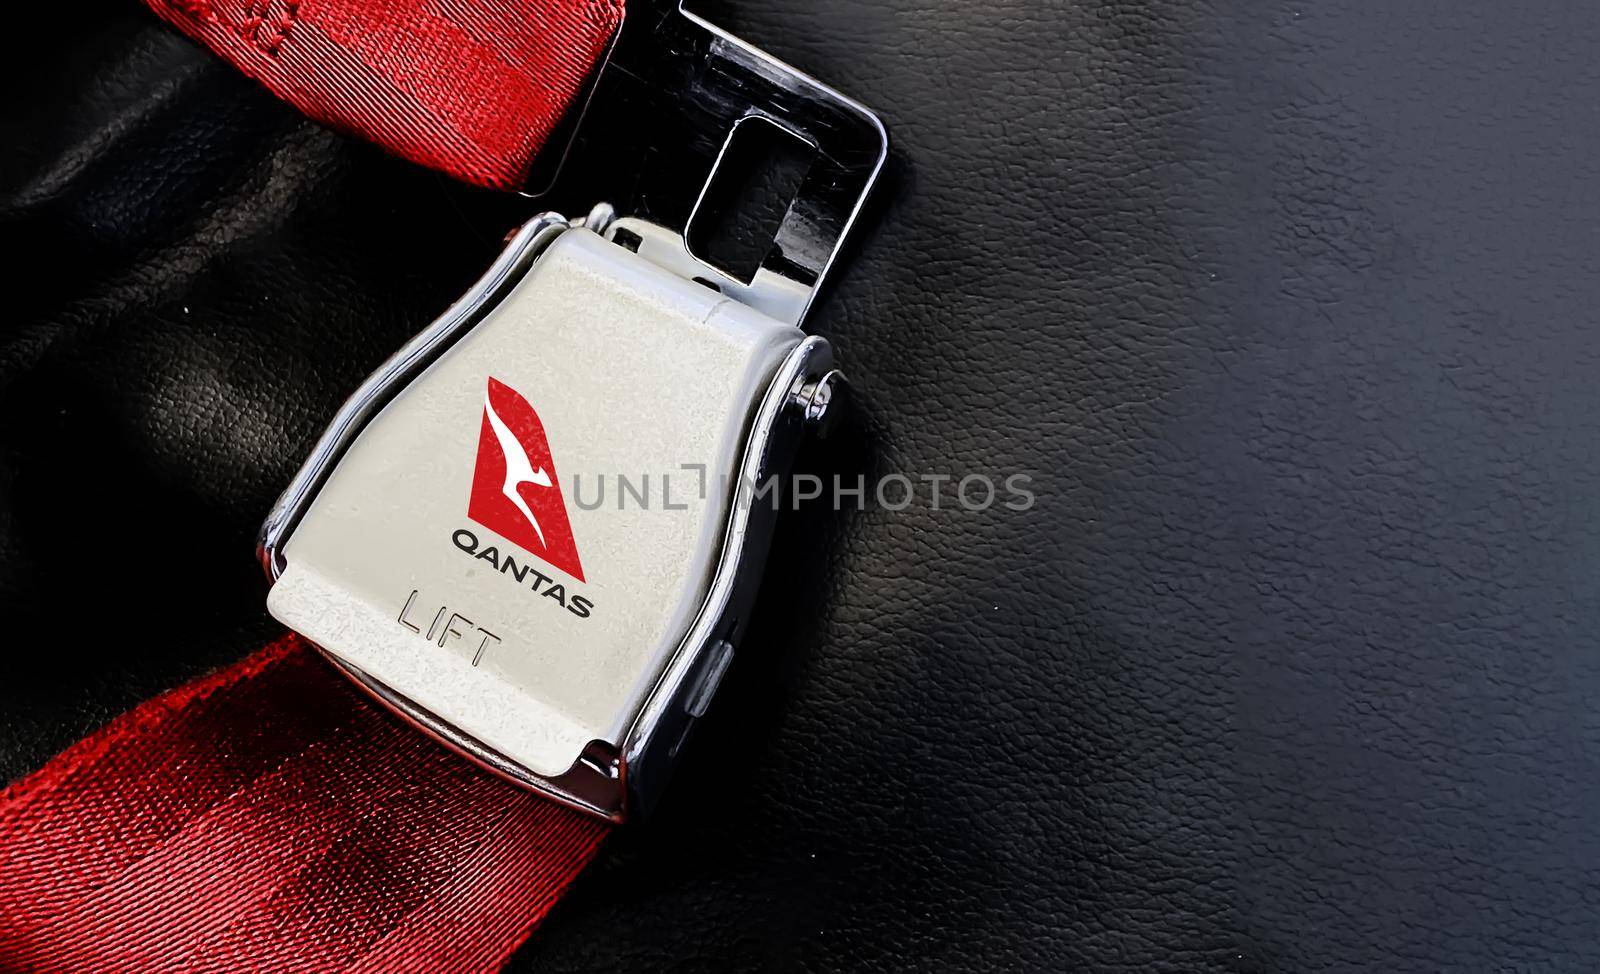 Sydney, Australia, July 2019: Red belt of an empty seat inside an airplane with the Qantas australian airlines logo printed on the metal. Qantas is the flag carrier airline of Australia. Travel and airport security